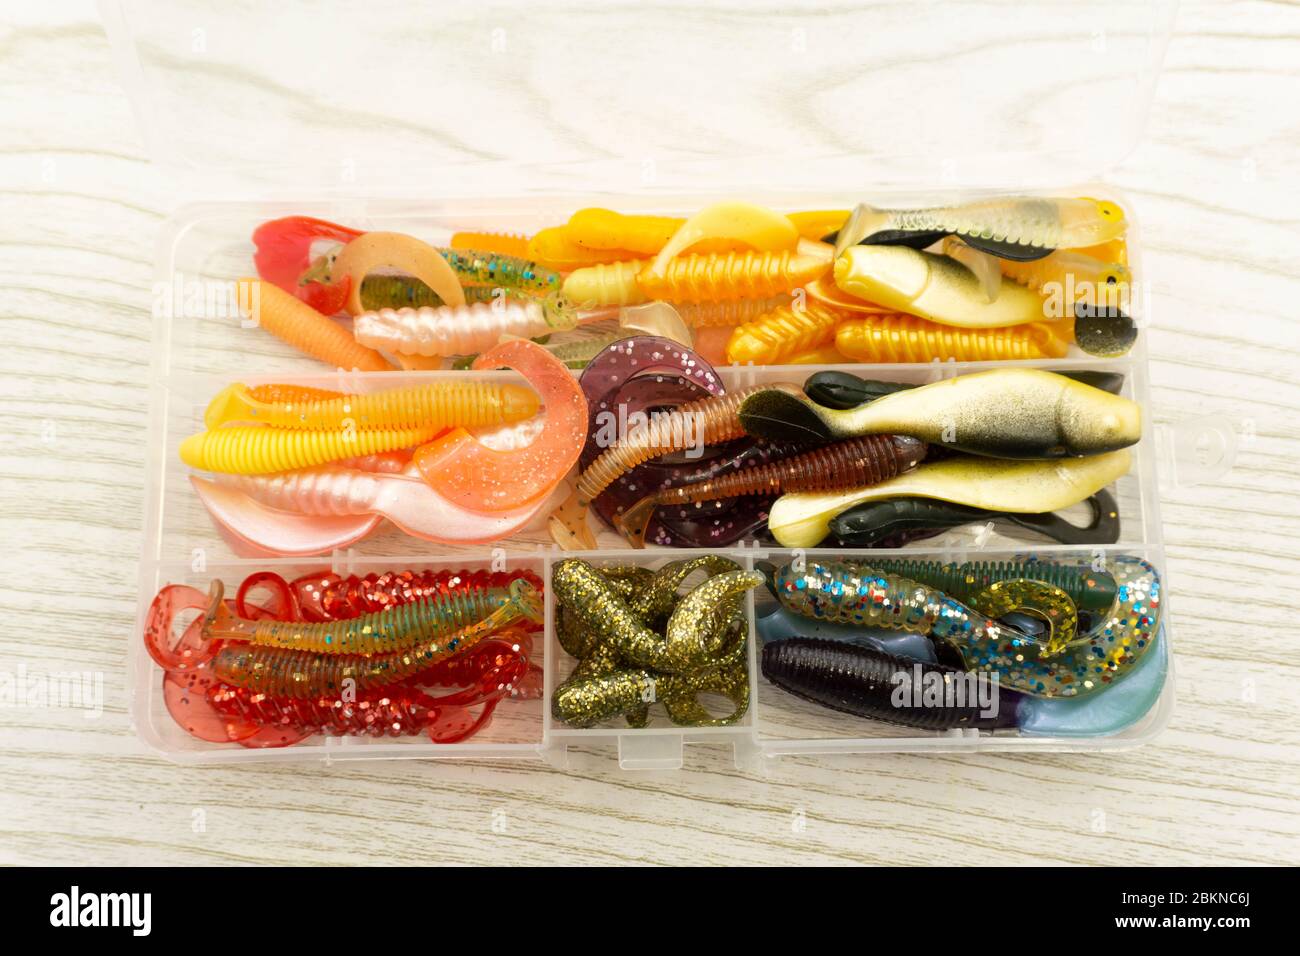 https://c8.alamy.com/comp/2BKNC6J/colorful-silicone-fishing-baits-with-plummets-on-wooden-table-toned-image-and-top-view-2BKNC6J.jpg